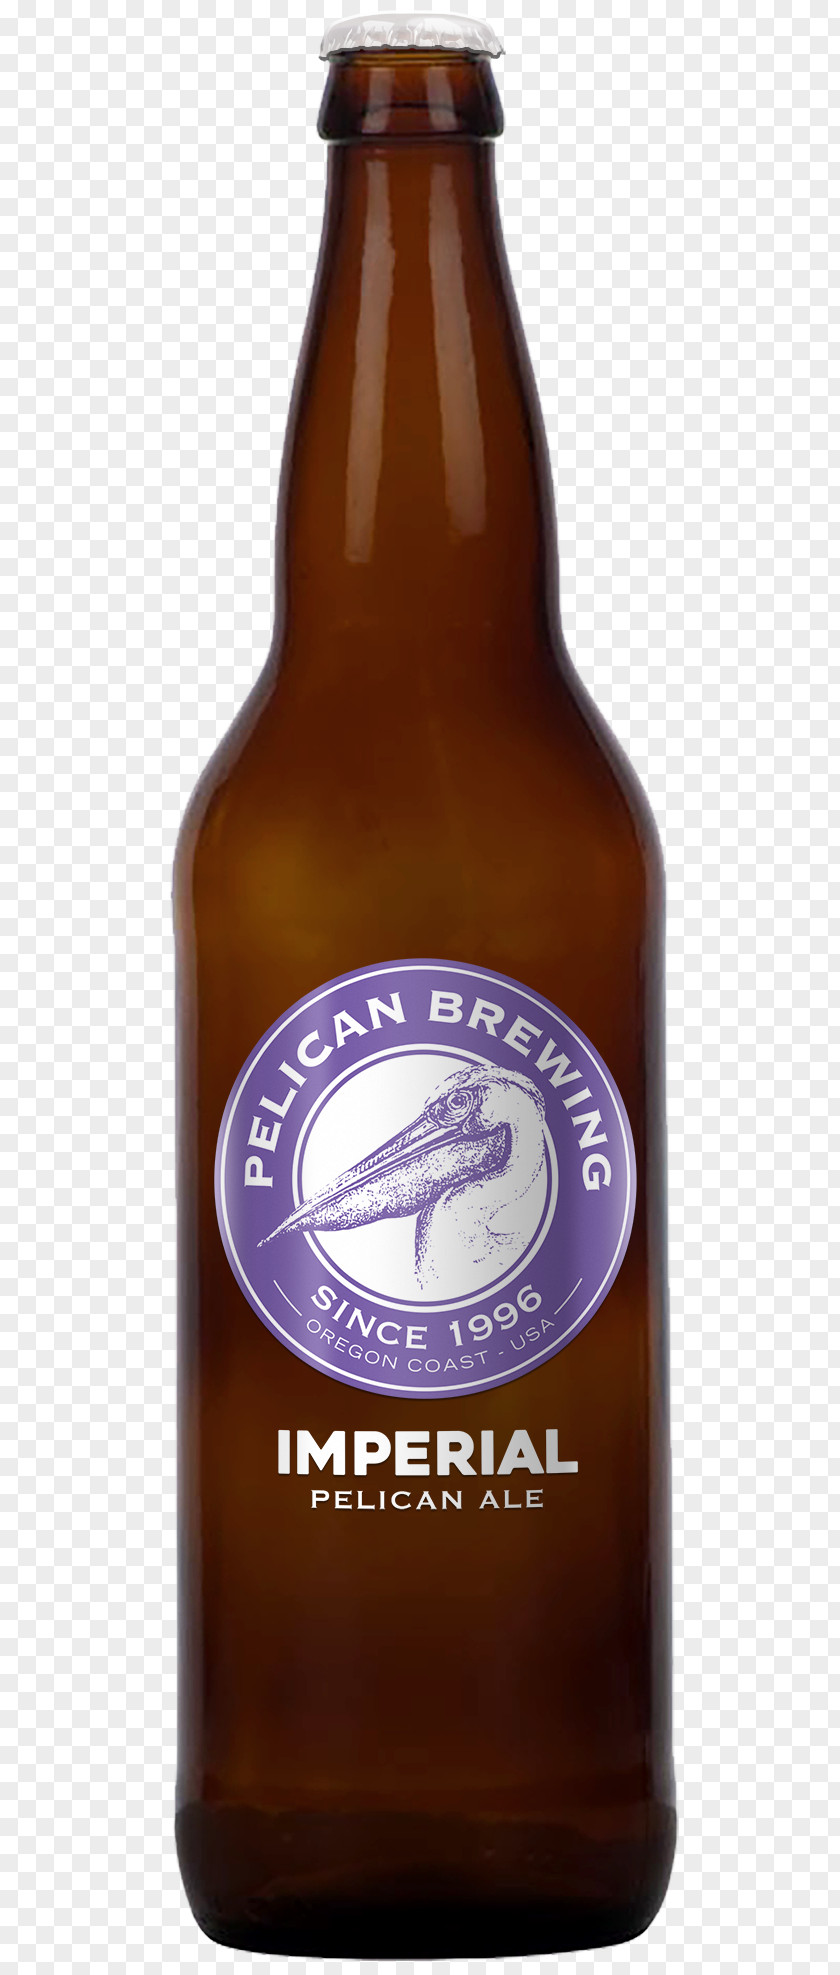 Beer India Pale Ale Bottle Pelican Brewing PNG